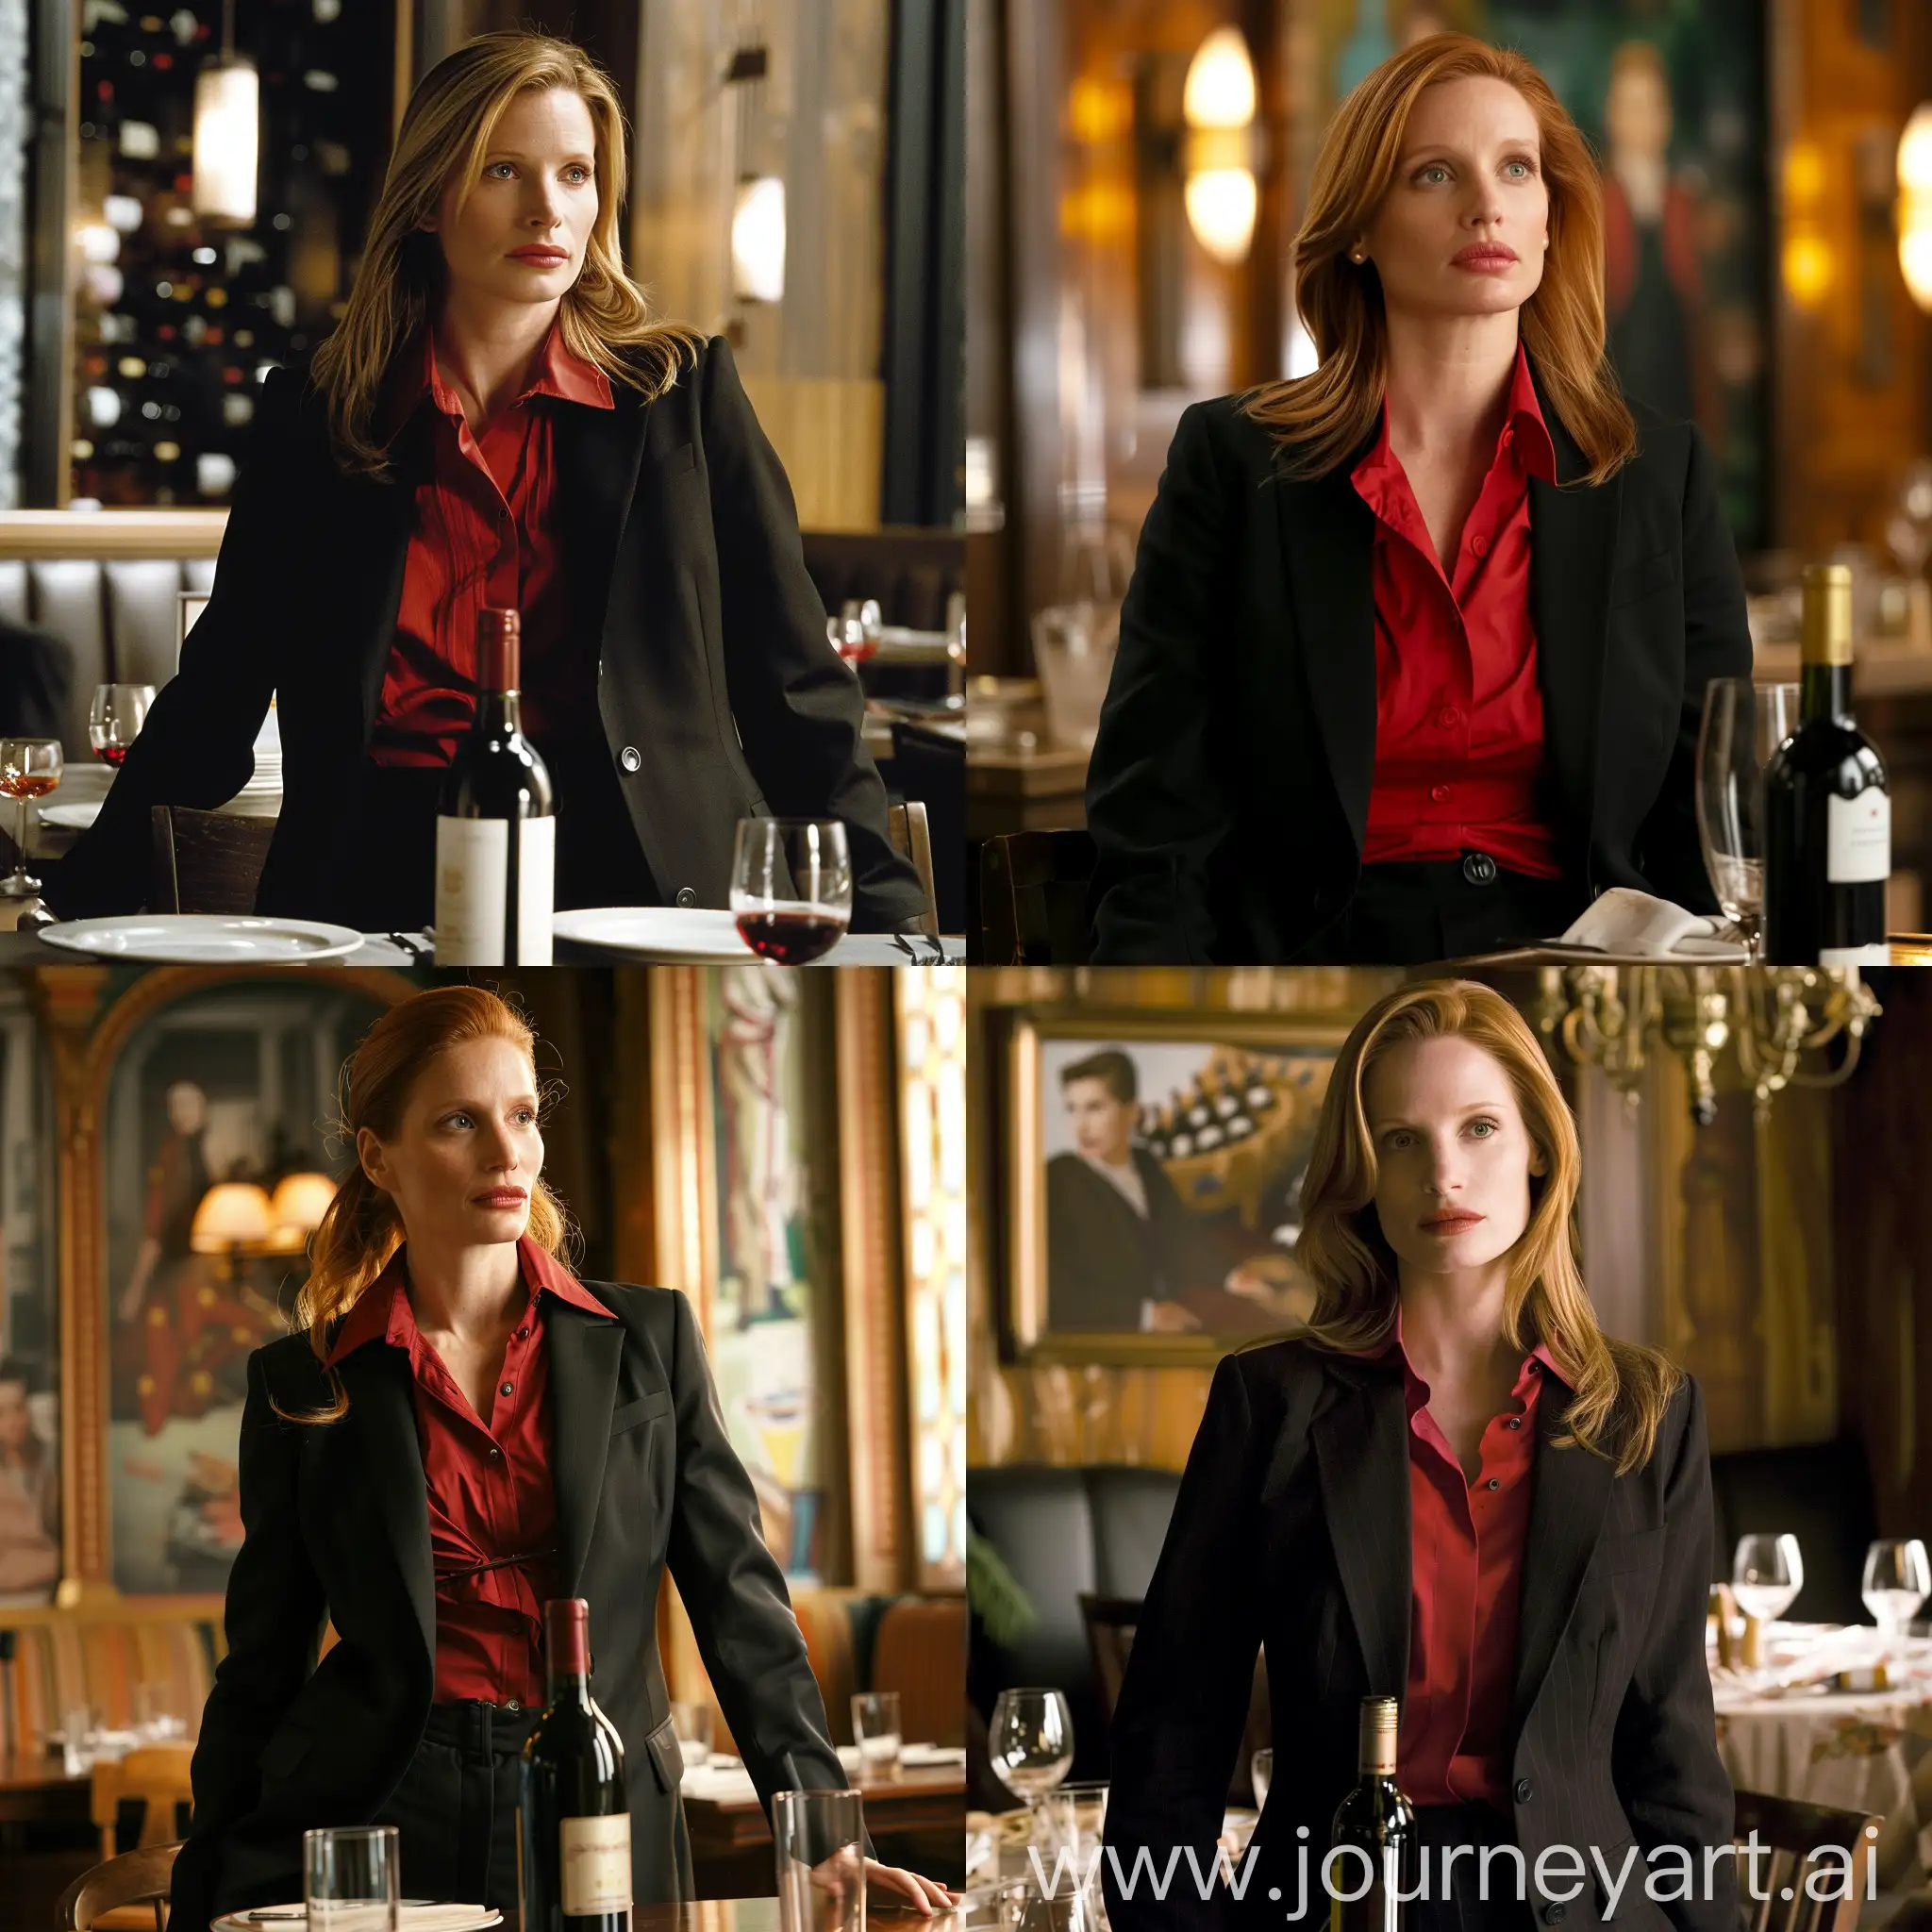 Jessica Chastain dressed in a black business suit with a red shirt looks with a stern look in a restaurant at a table with a bottle of wine